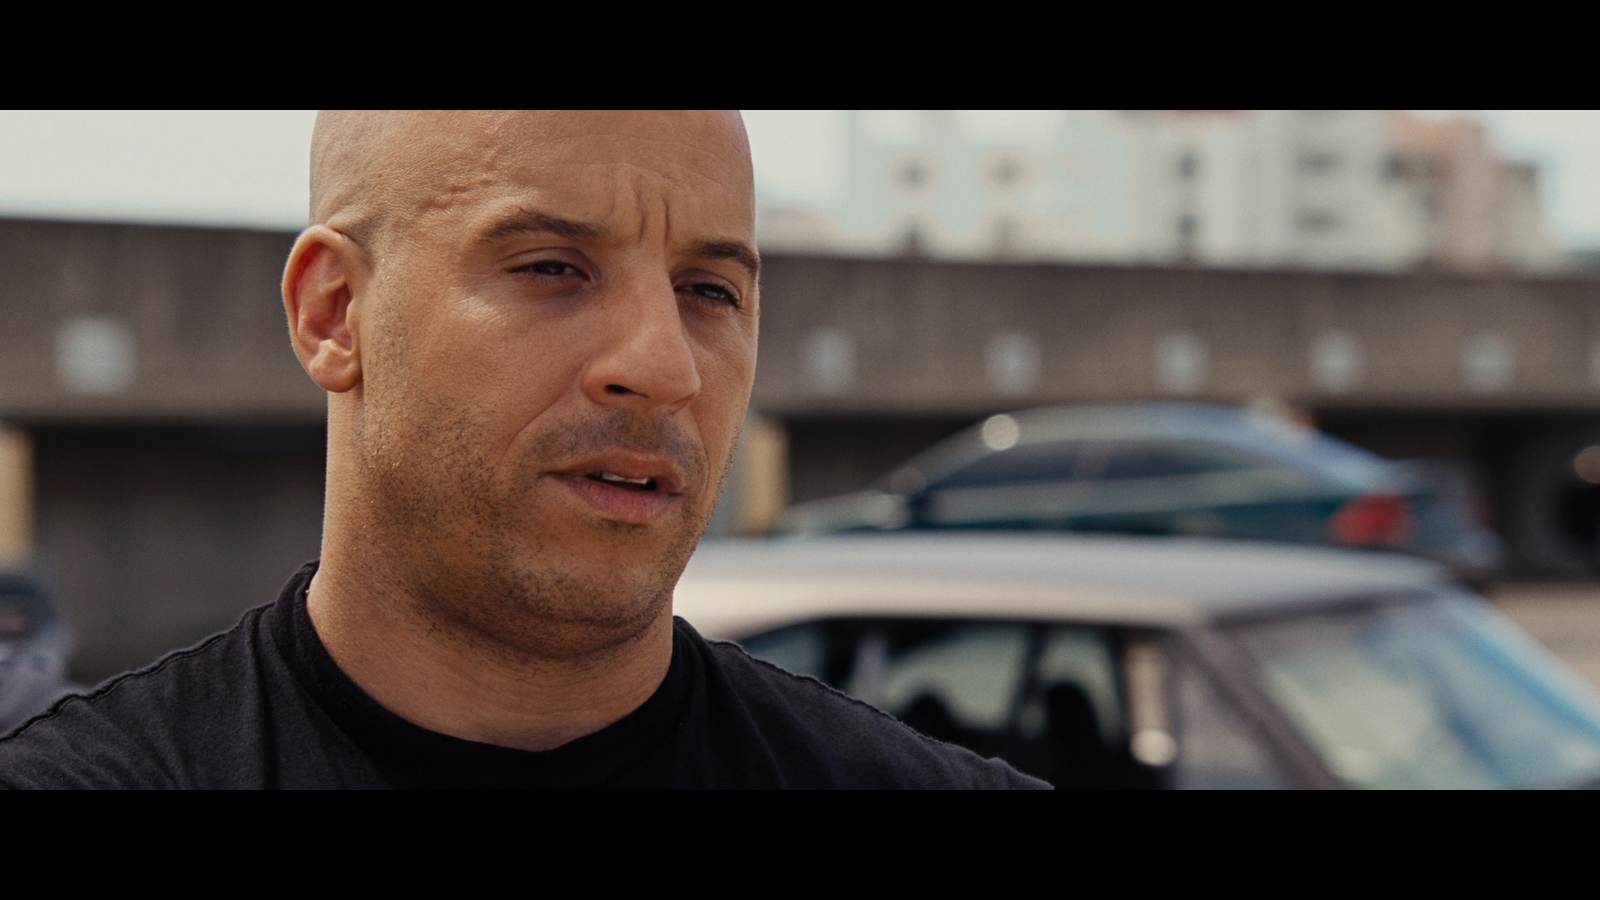 fast and furious 5 movie full movie 2011